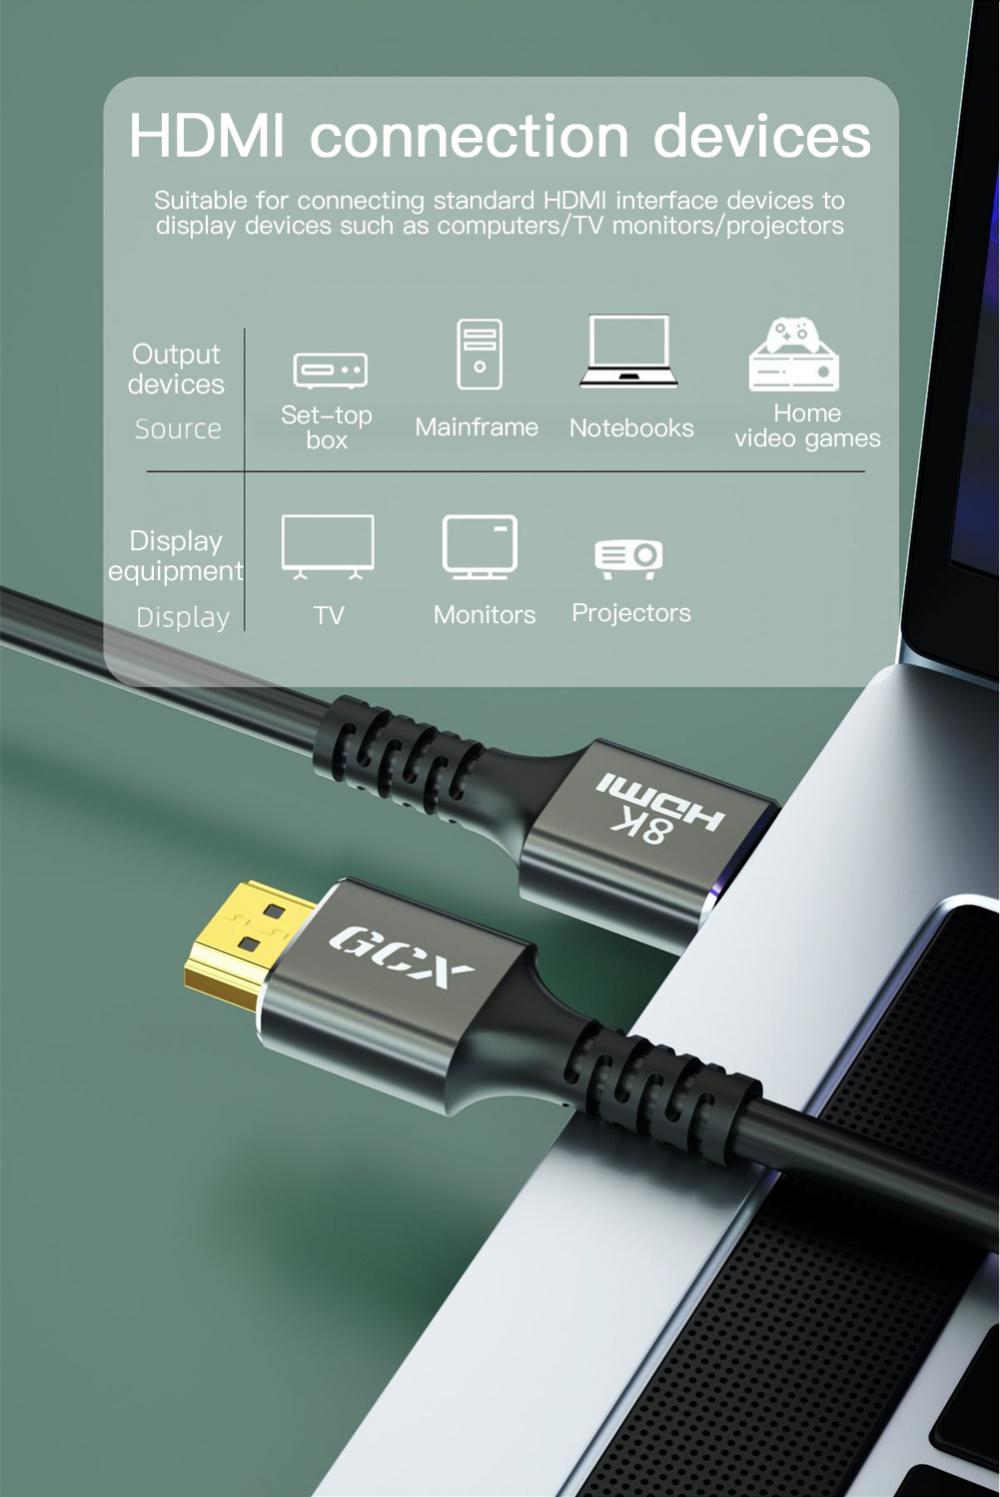 Cable HDMI to HDMI 2.1 US03 8K ultra HD - HOCO